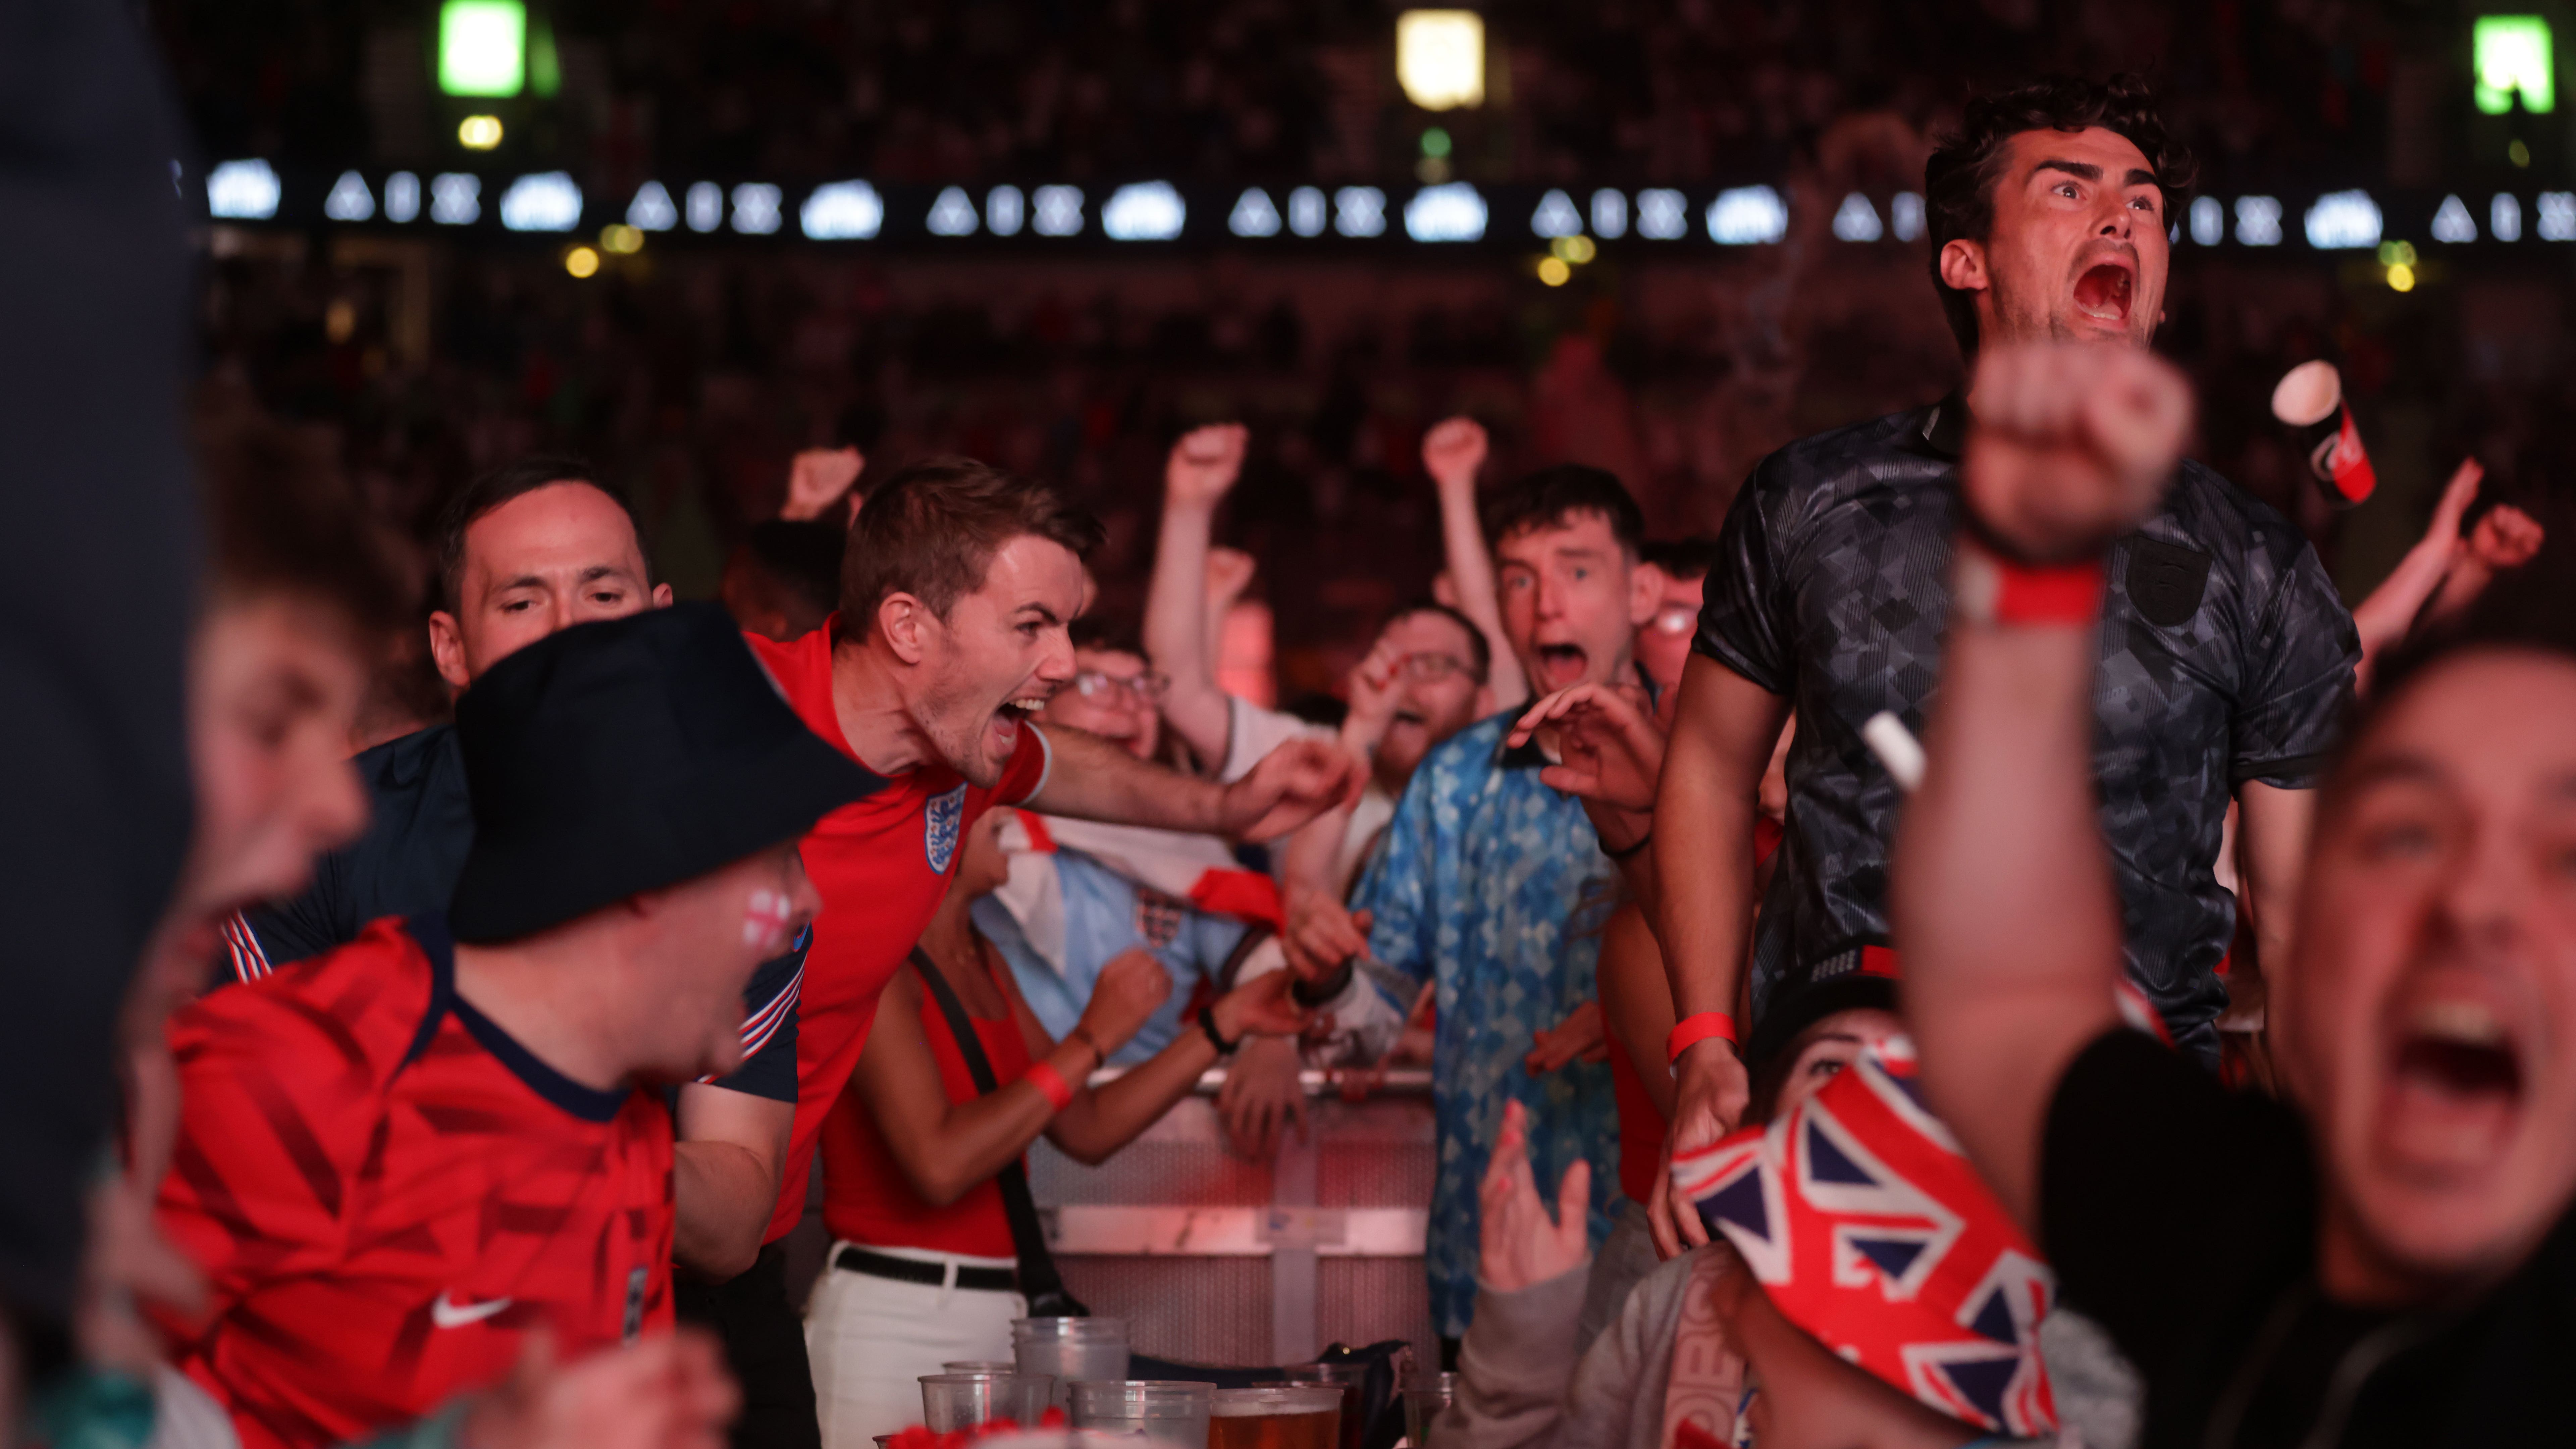 England team ‘saved’ night-time sector, industry boss says after Euros defeat